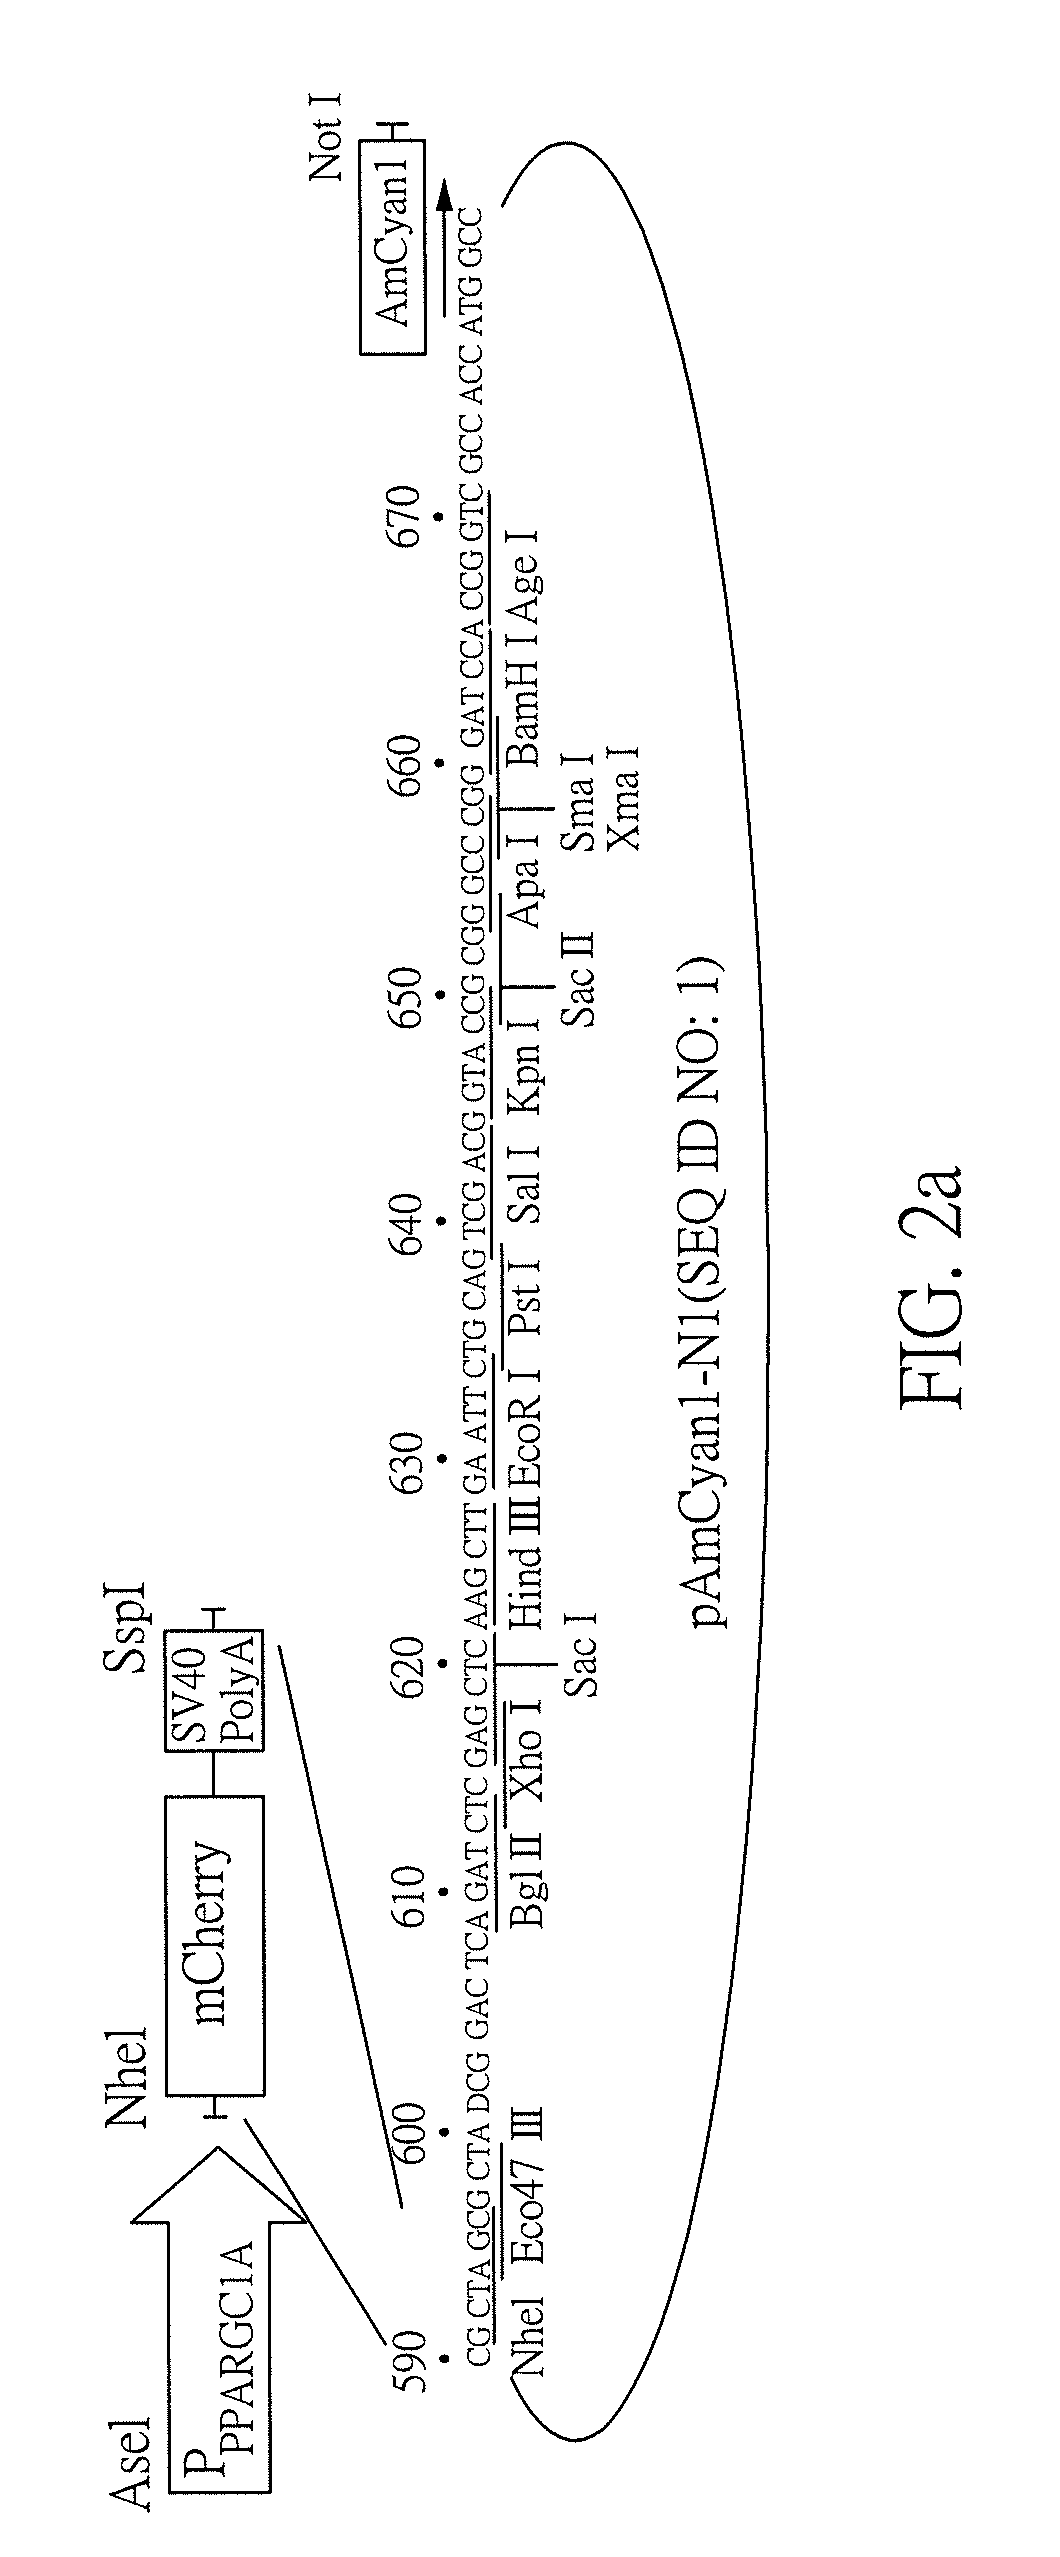 Method for inhibiting neuronal cell aggregation